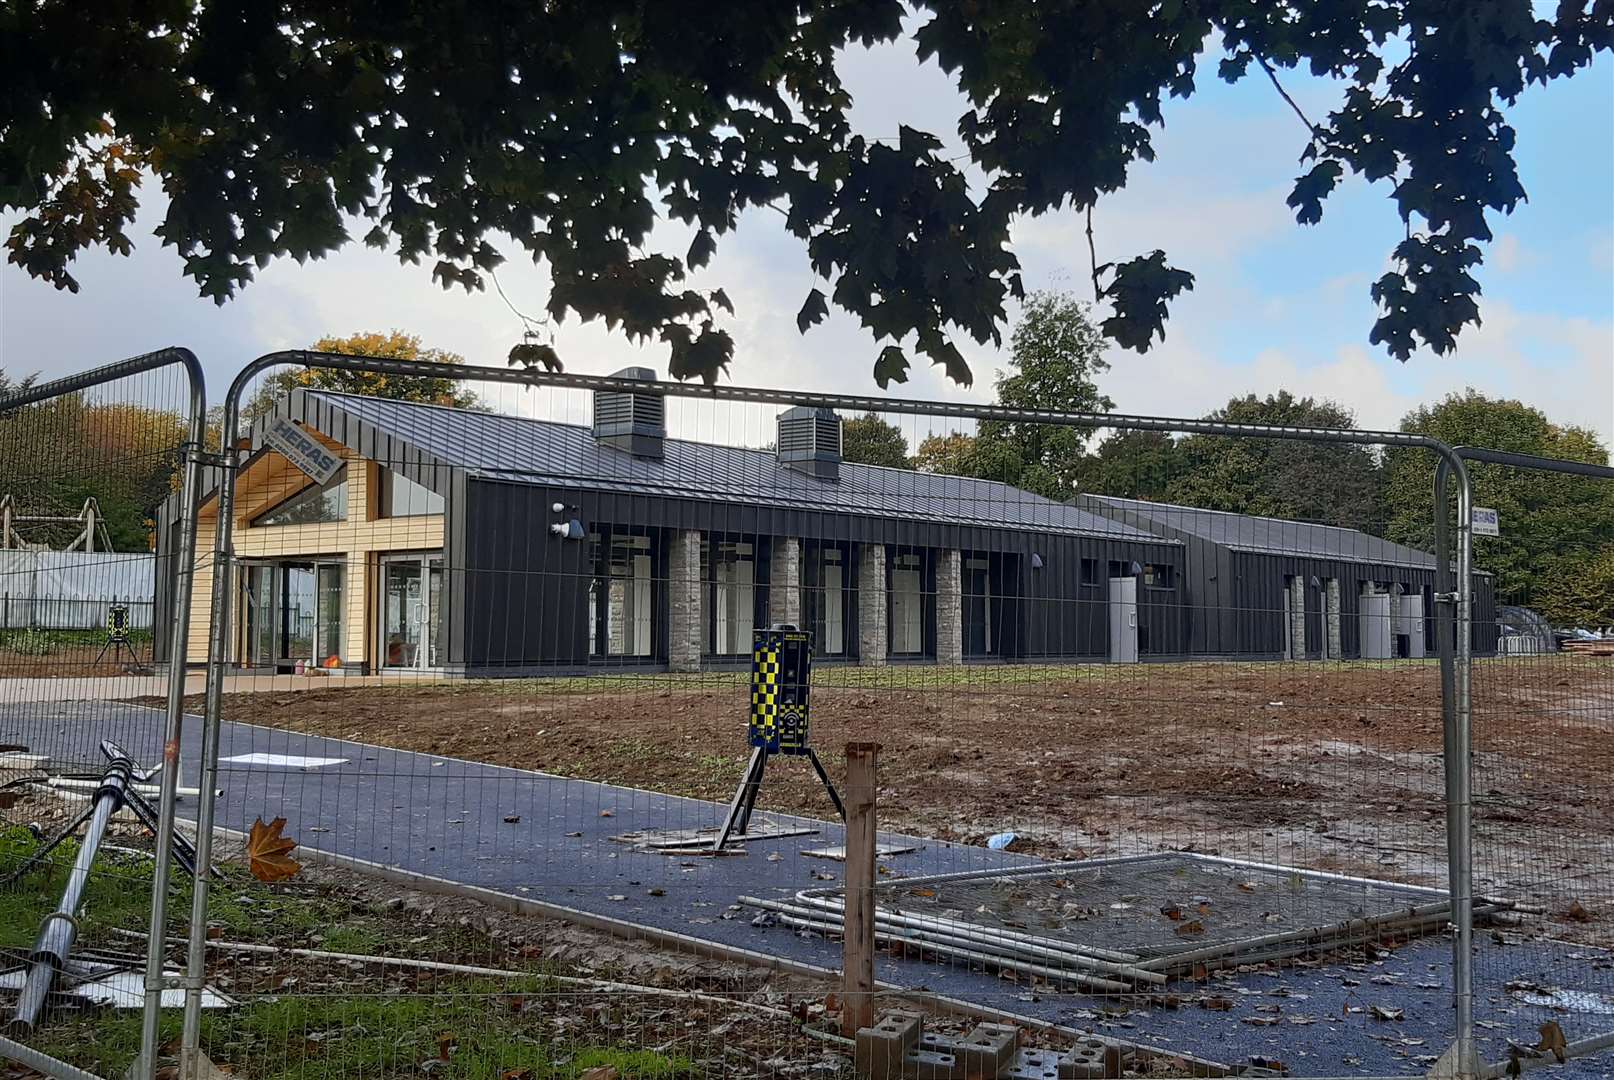 The opening of the new cafe in Mote Park has been delayed